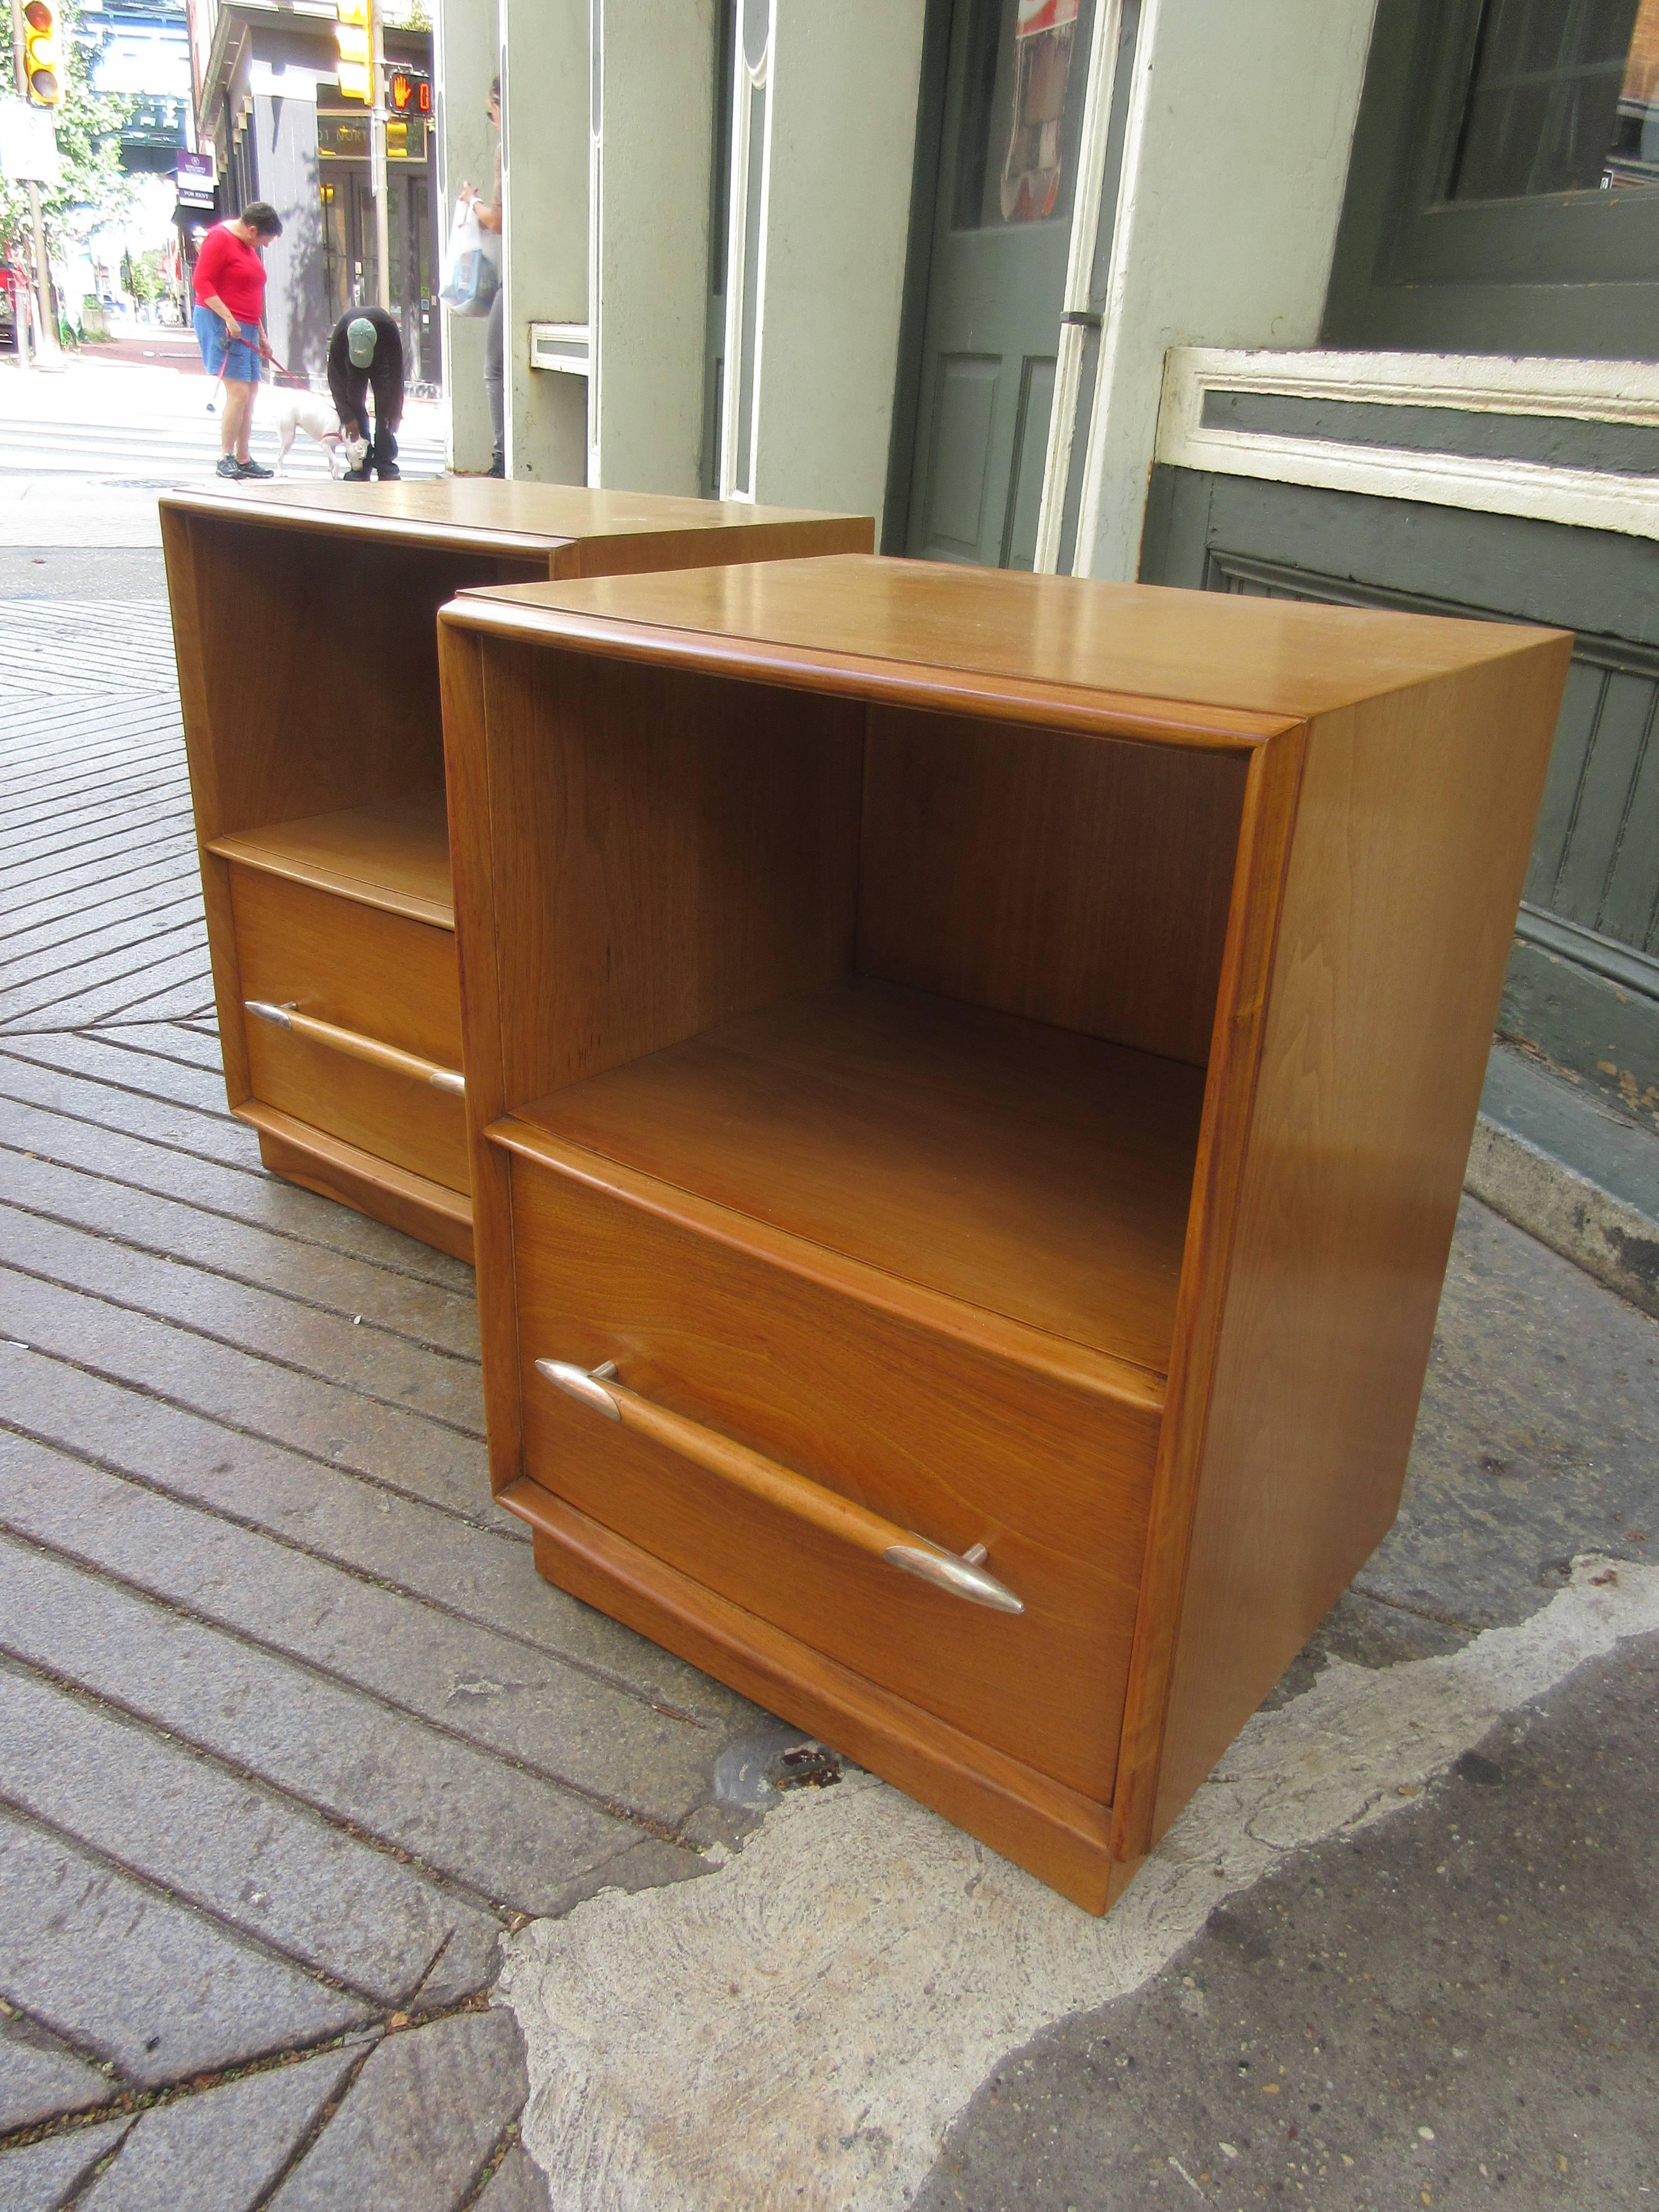 Pair of nightstands in honey walnut with polished aluminum drawer pulls. One large drawer at bottom of each with larger open space above. Pieces retain original tags. One is slightly lighter than the other but not noticeable when separated by a bed.